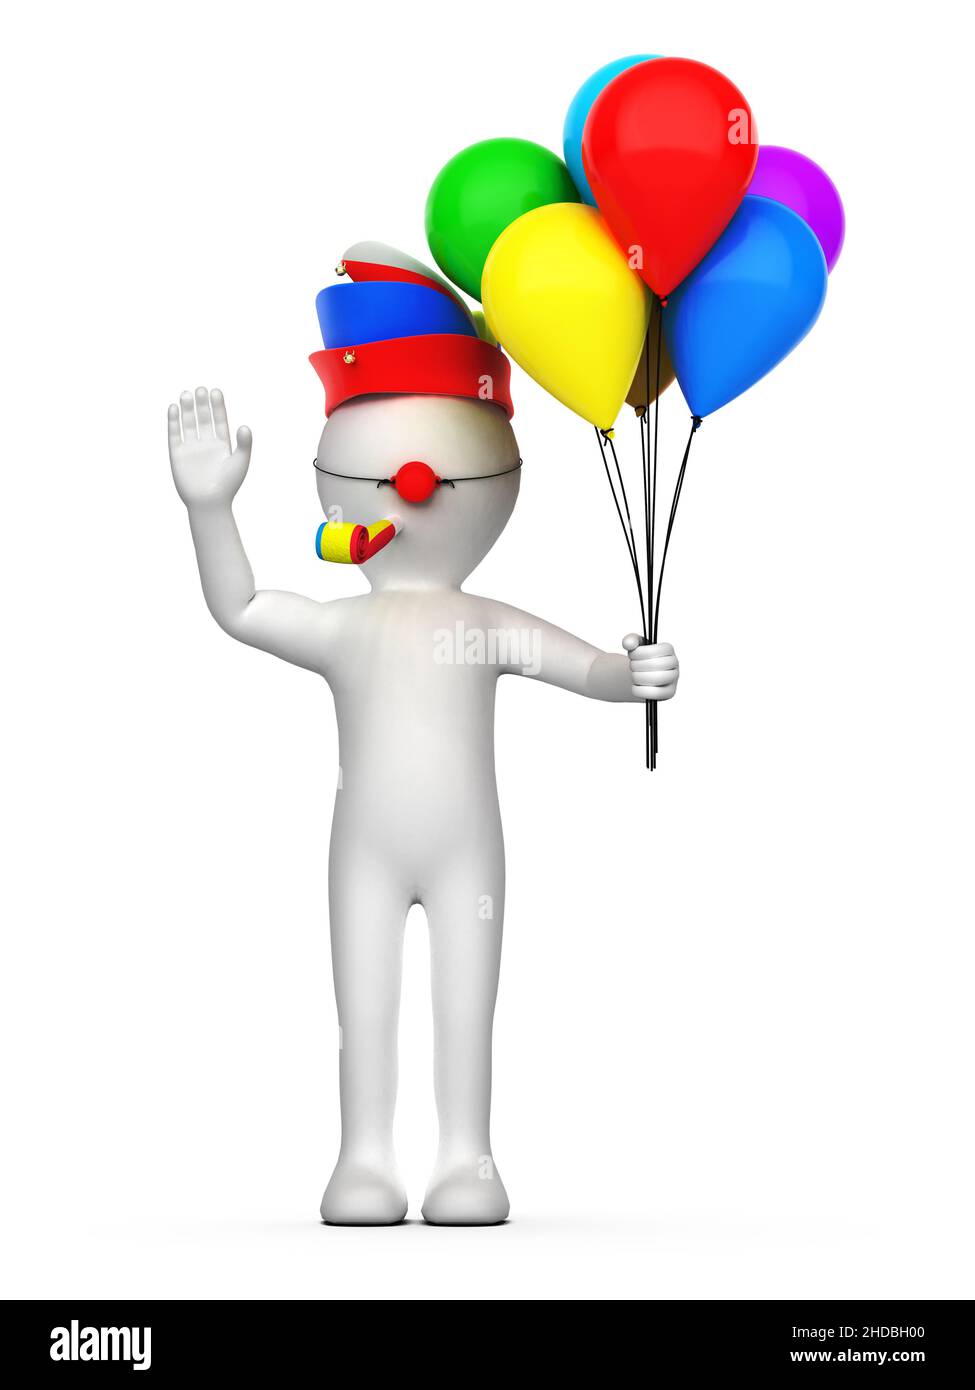 White cartoon character with colorful balloons, carnival cap and red nose as a clown, isolated on white background, 3D rendering Stock Photo